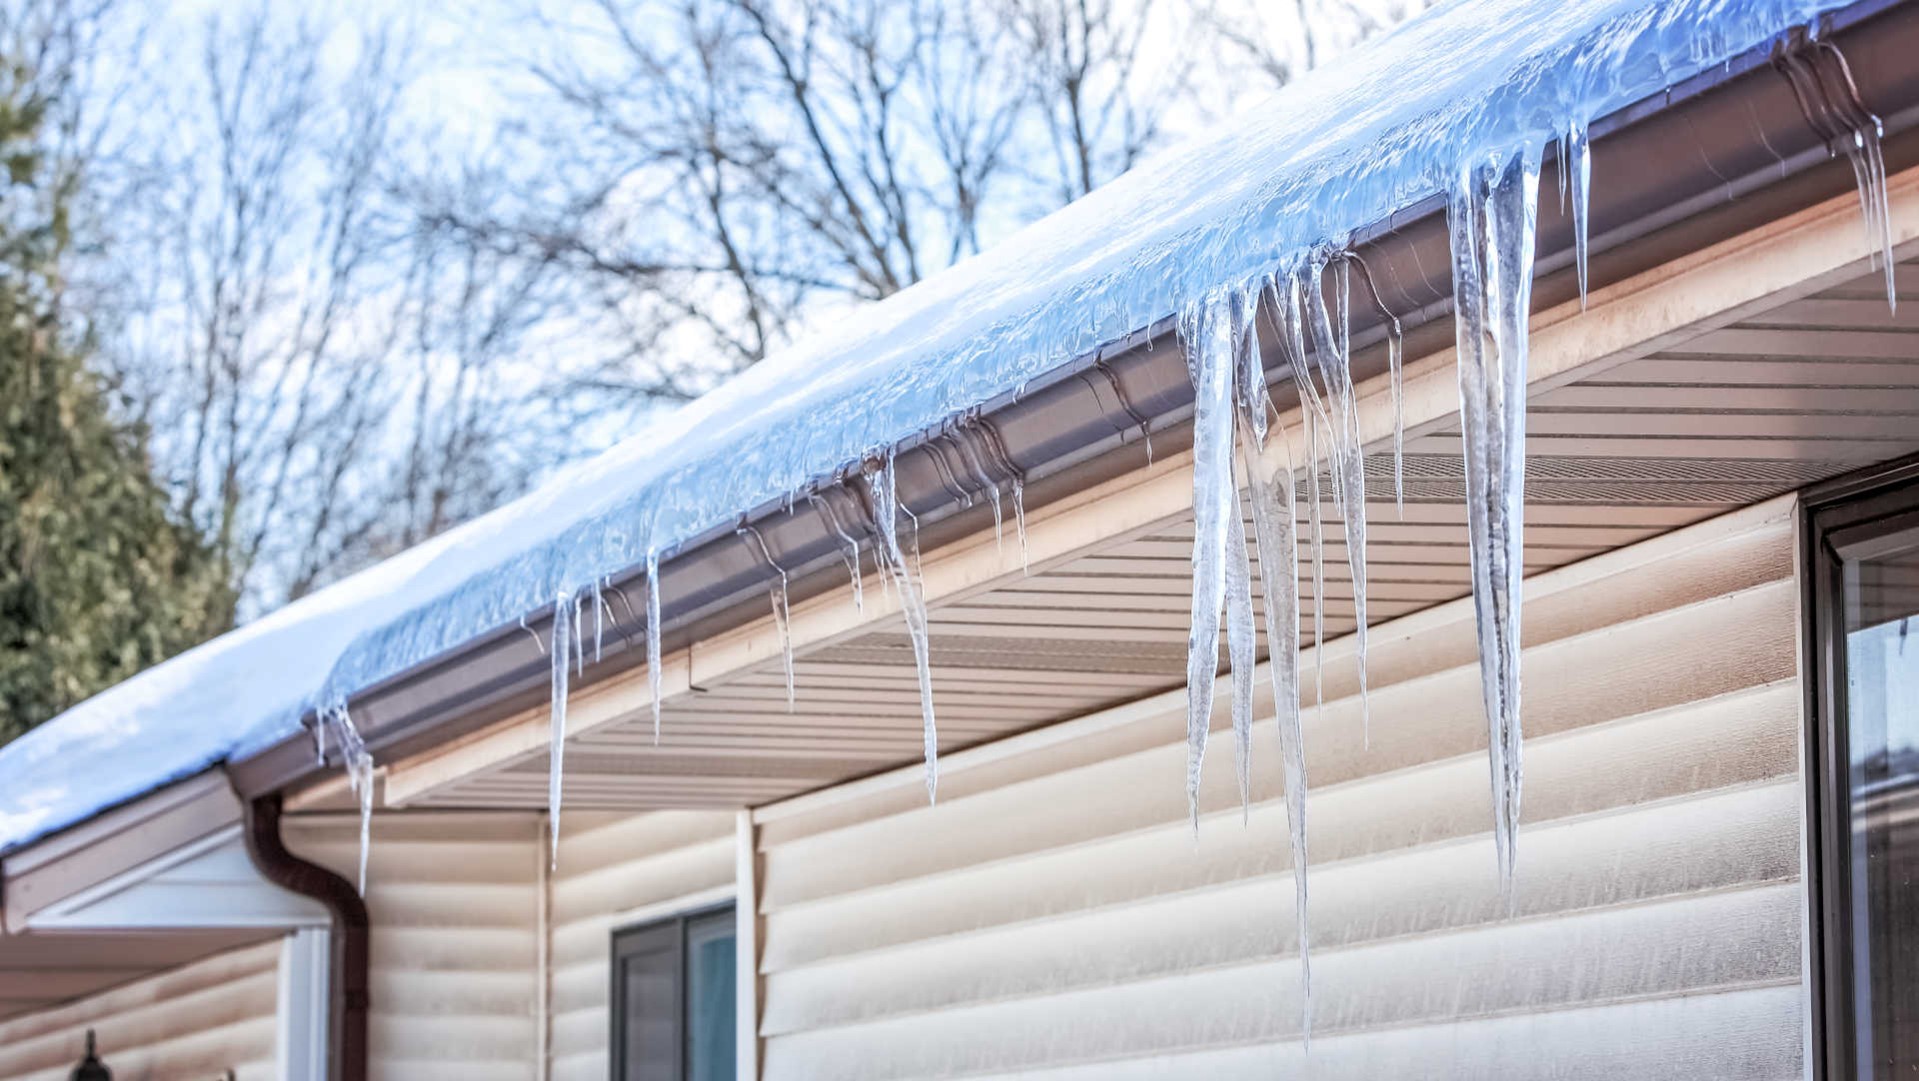 Icicles hanging from frozen gutters